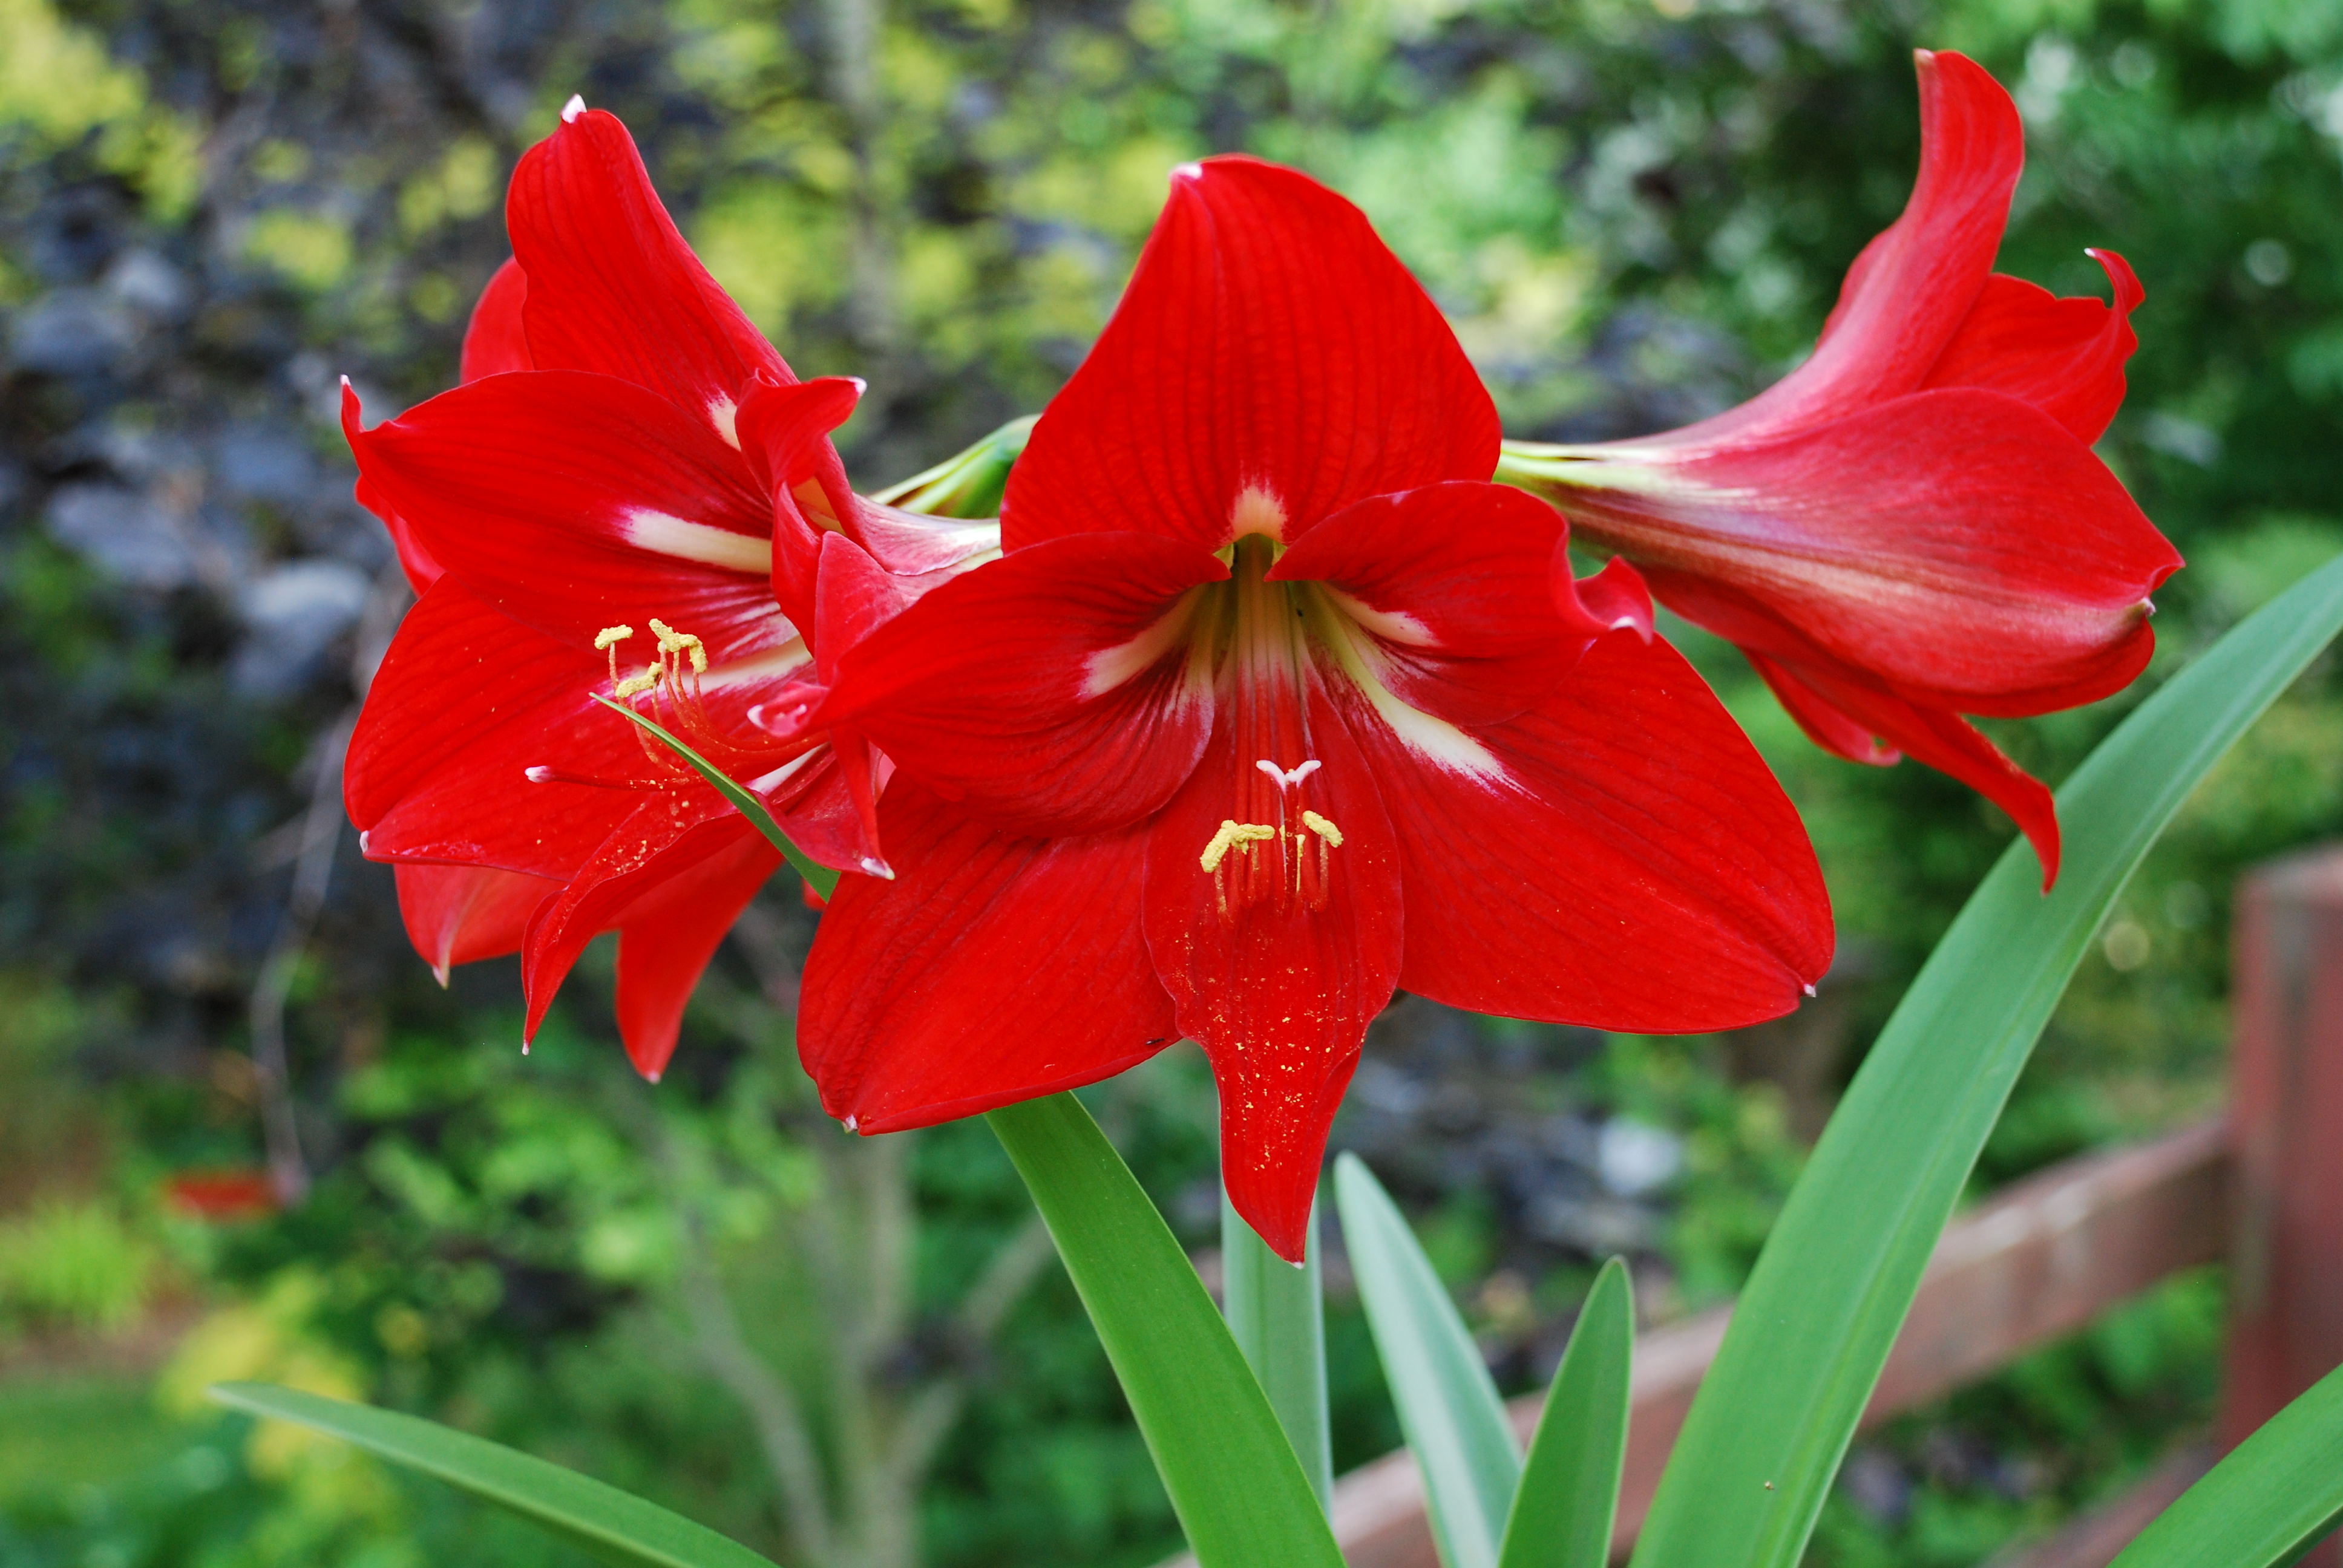 Growing Amaryllis | What Grows There :: Hugh Conlon, Horticulturalist